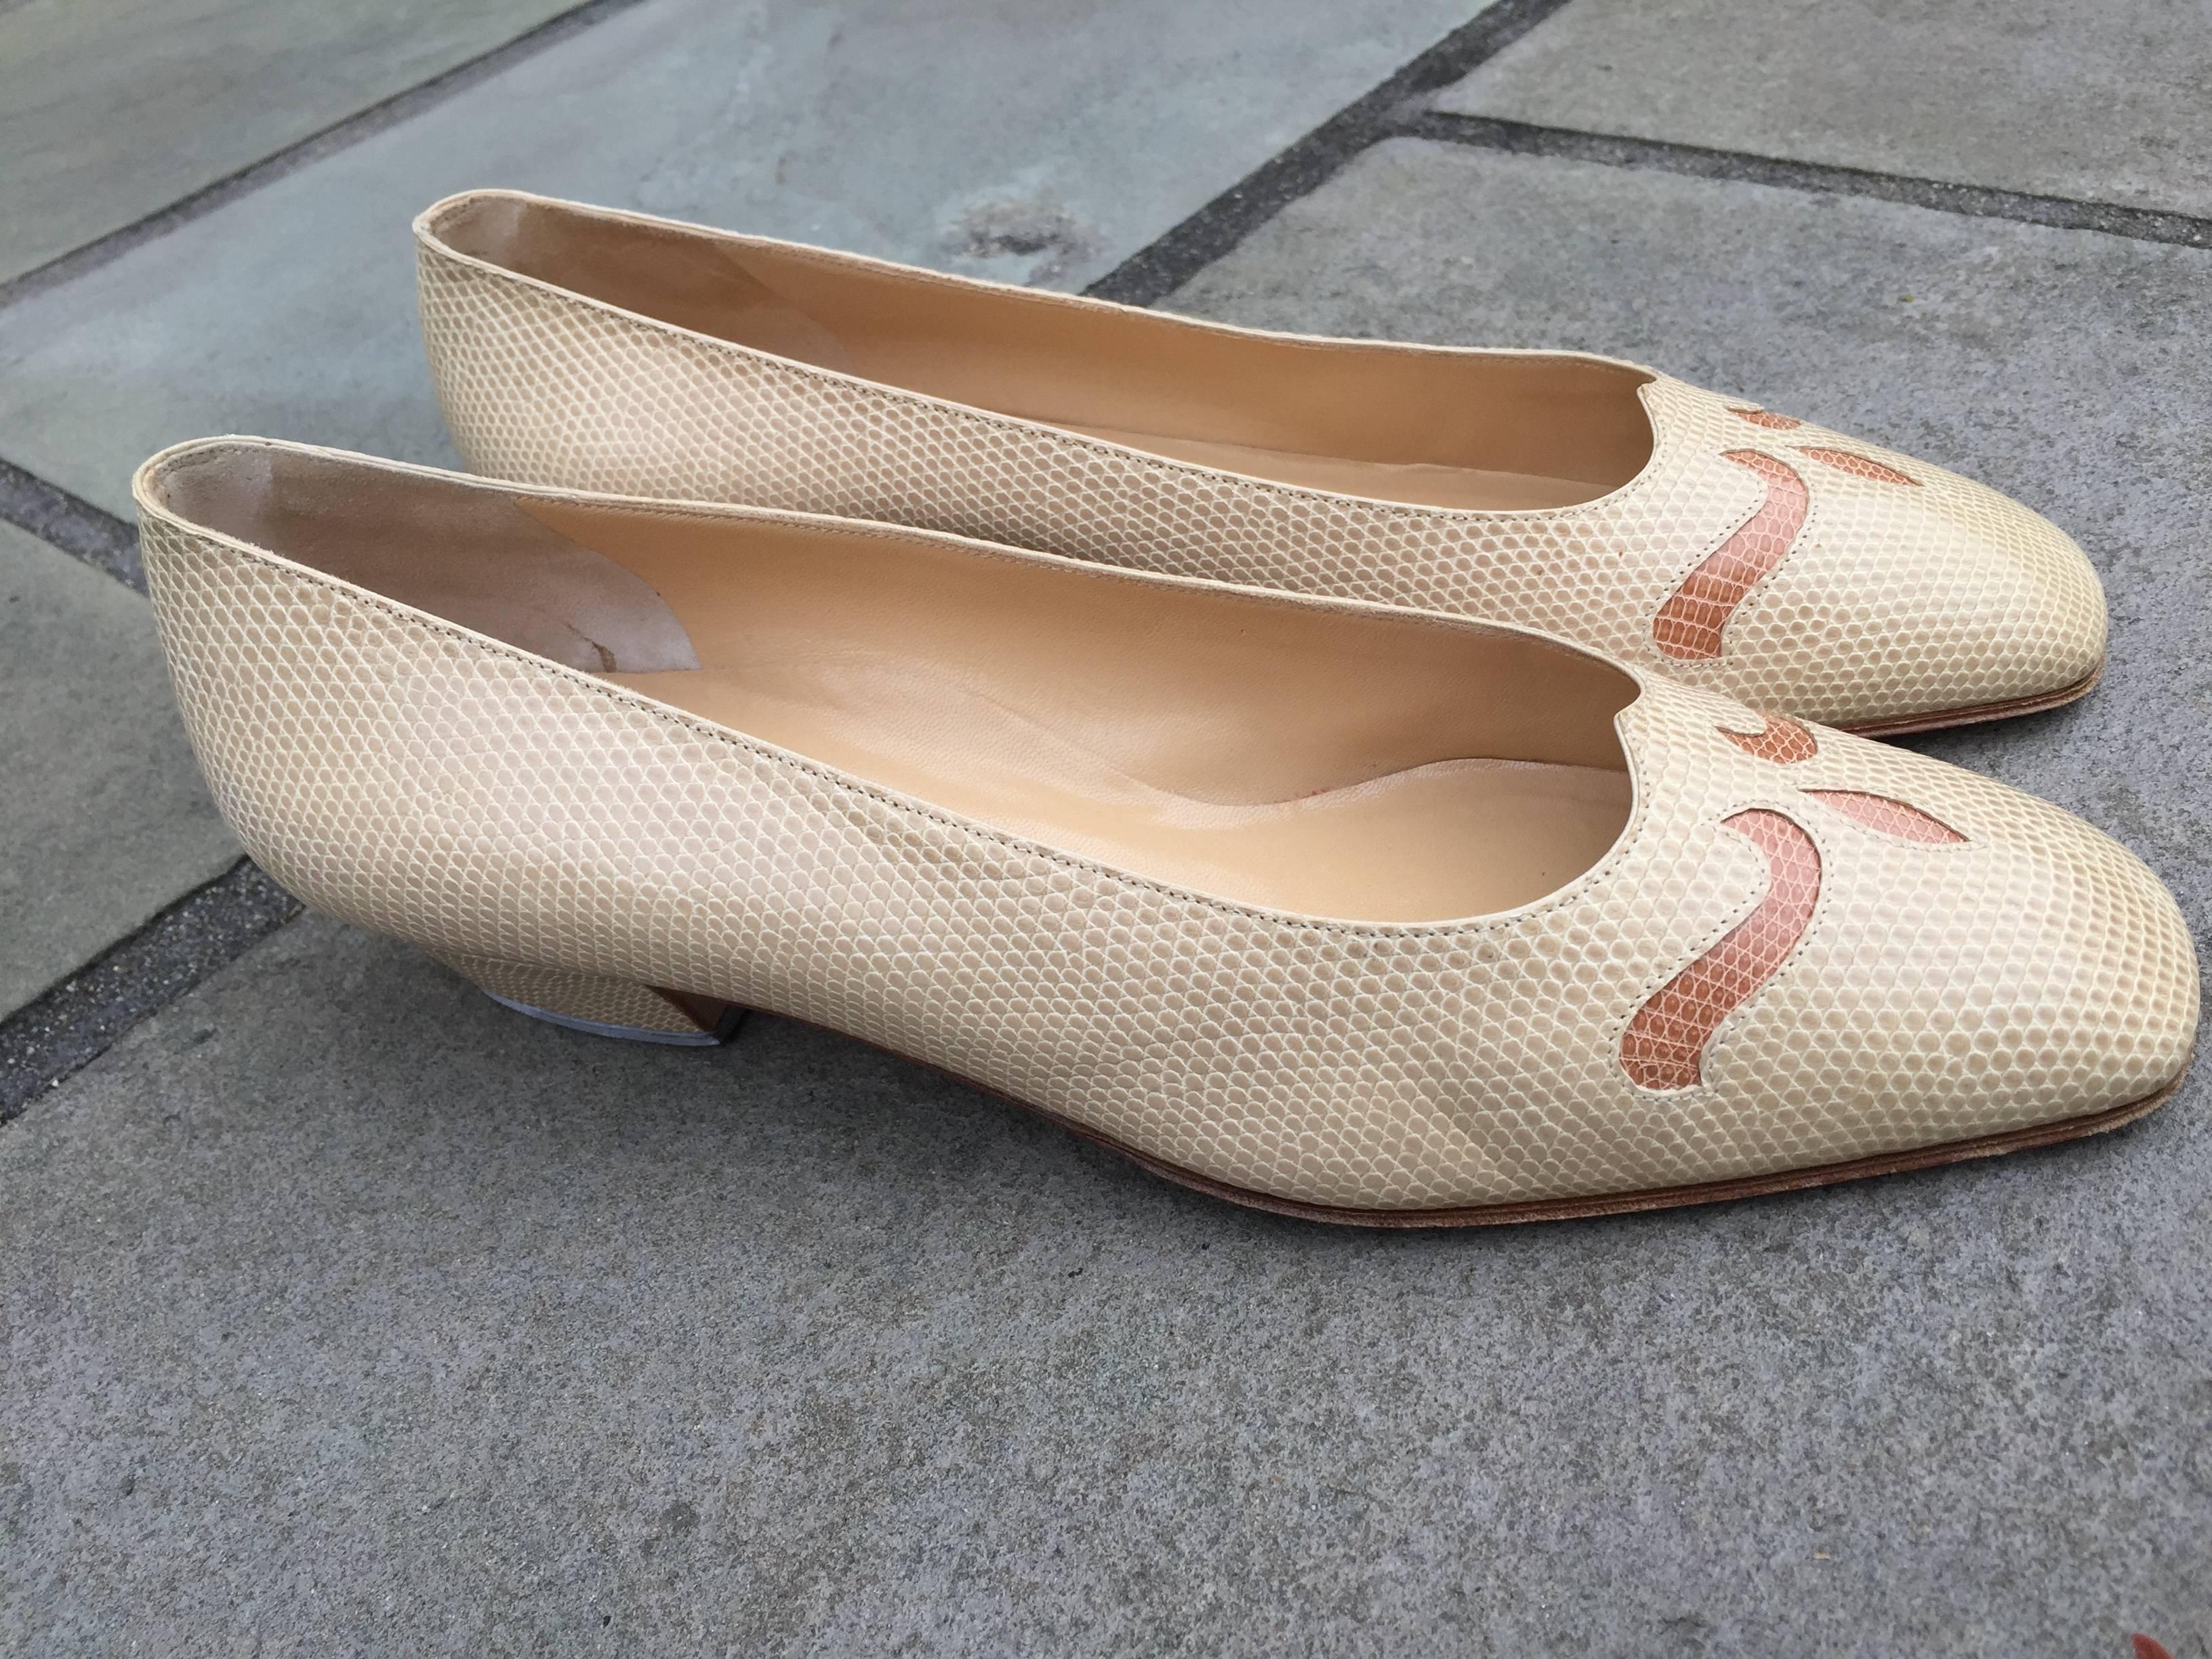 Wonderful two tone tan and brown flats from Helene Arpels Couture.
Barely worn.
Size 8 1.2 B